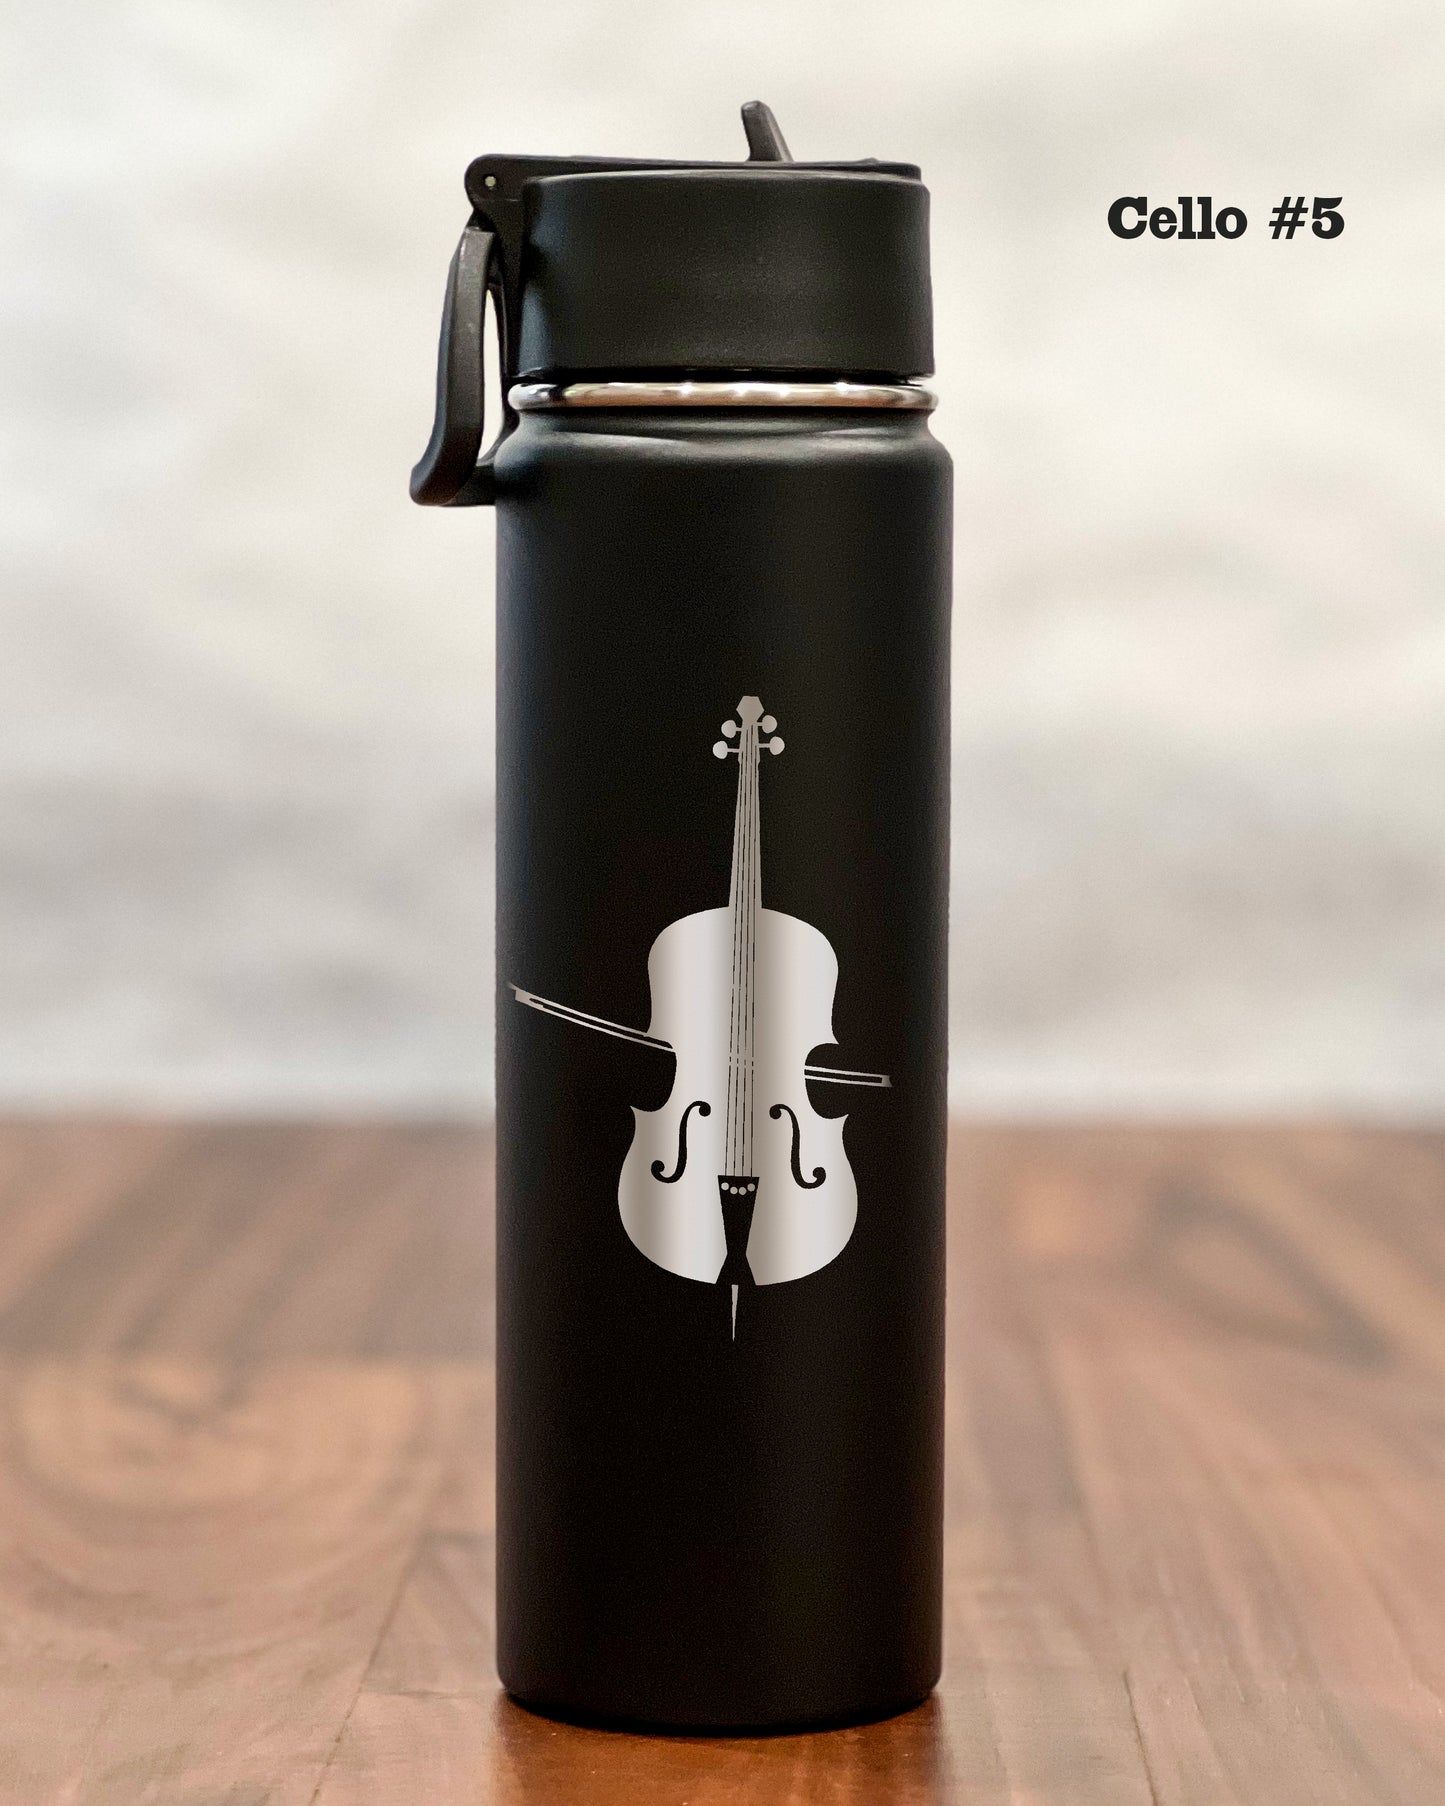 24 ounce Water Bottle with engraved Cello